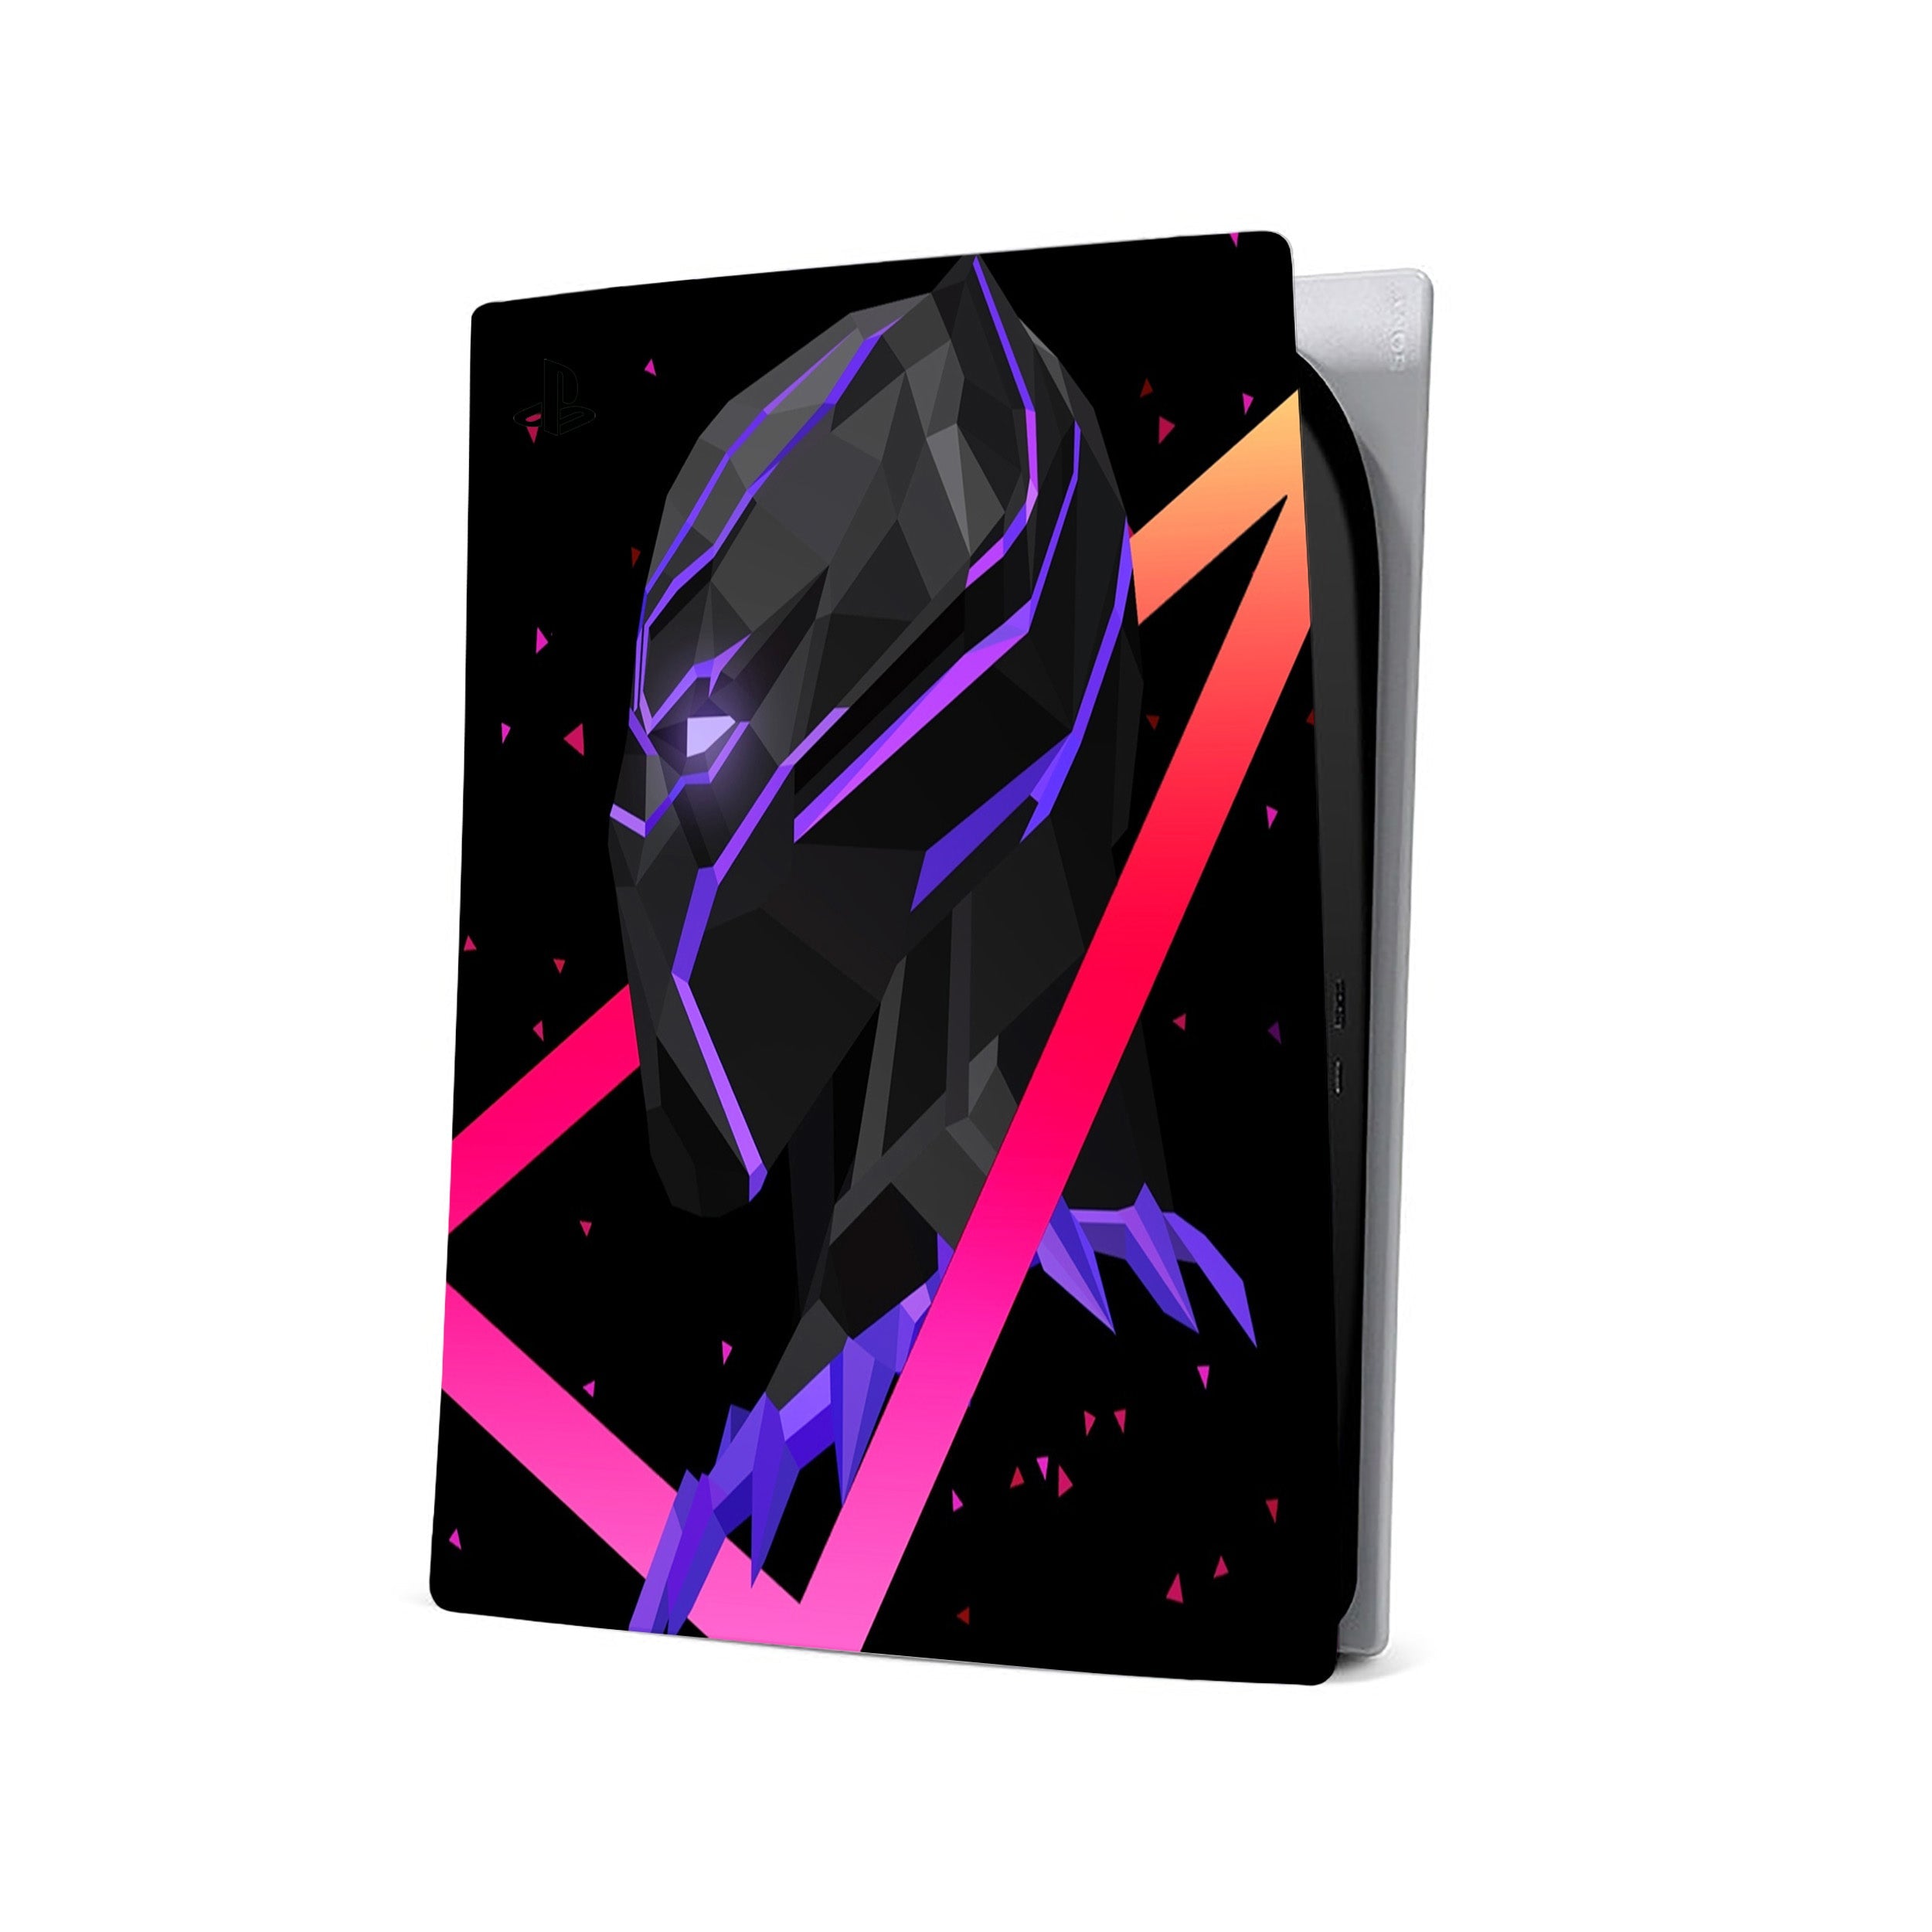 A video game skin featuring a Marvel Comics Black Panther design for the PS5.